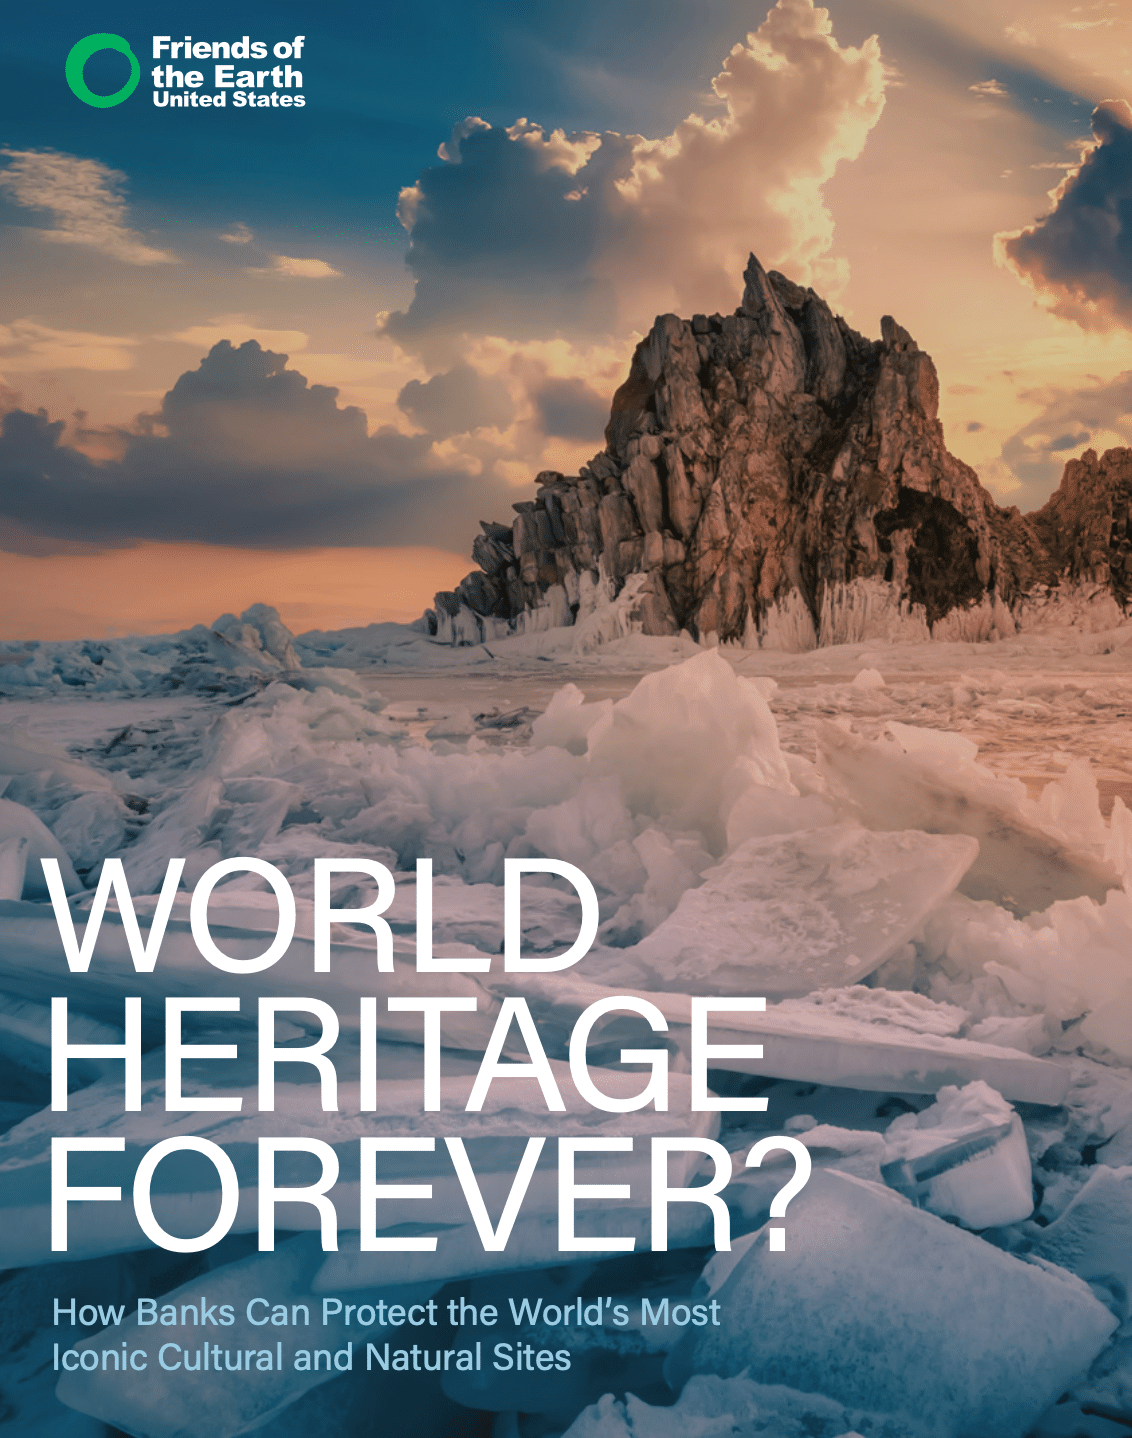 World Heritage Forever? How Banks Can Protect the World’s Most Iconic Cultural and Natural Sites